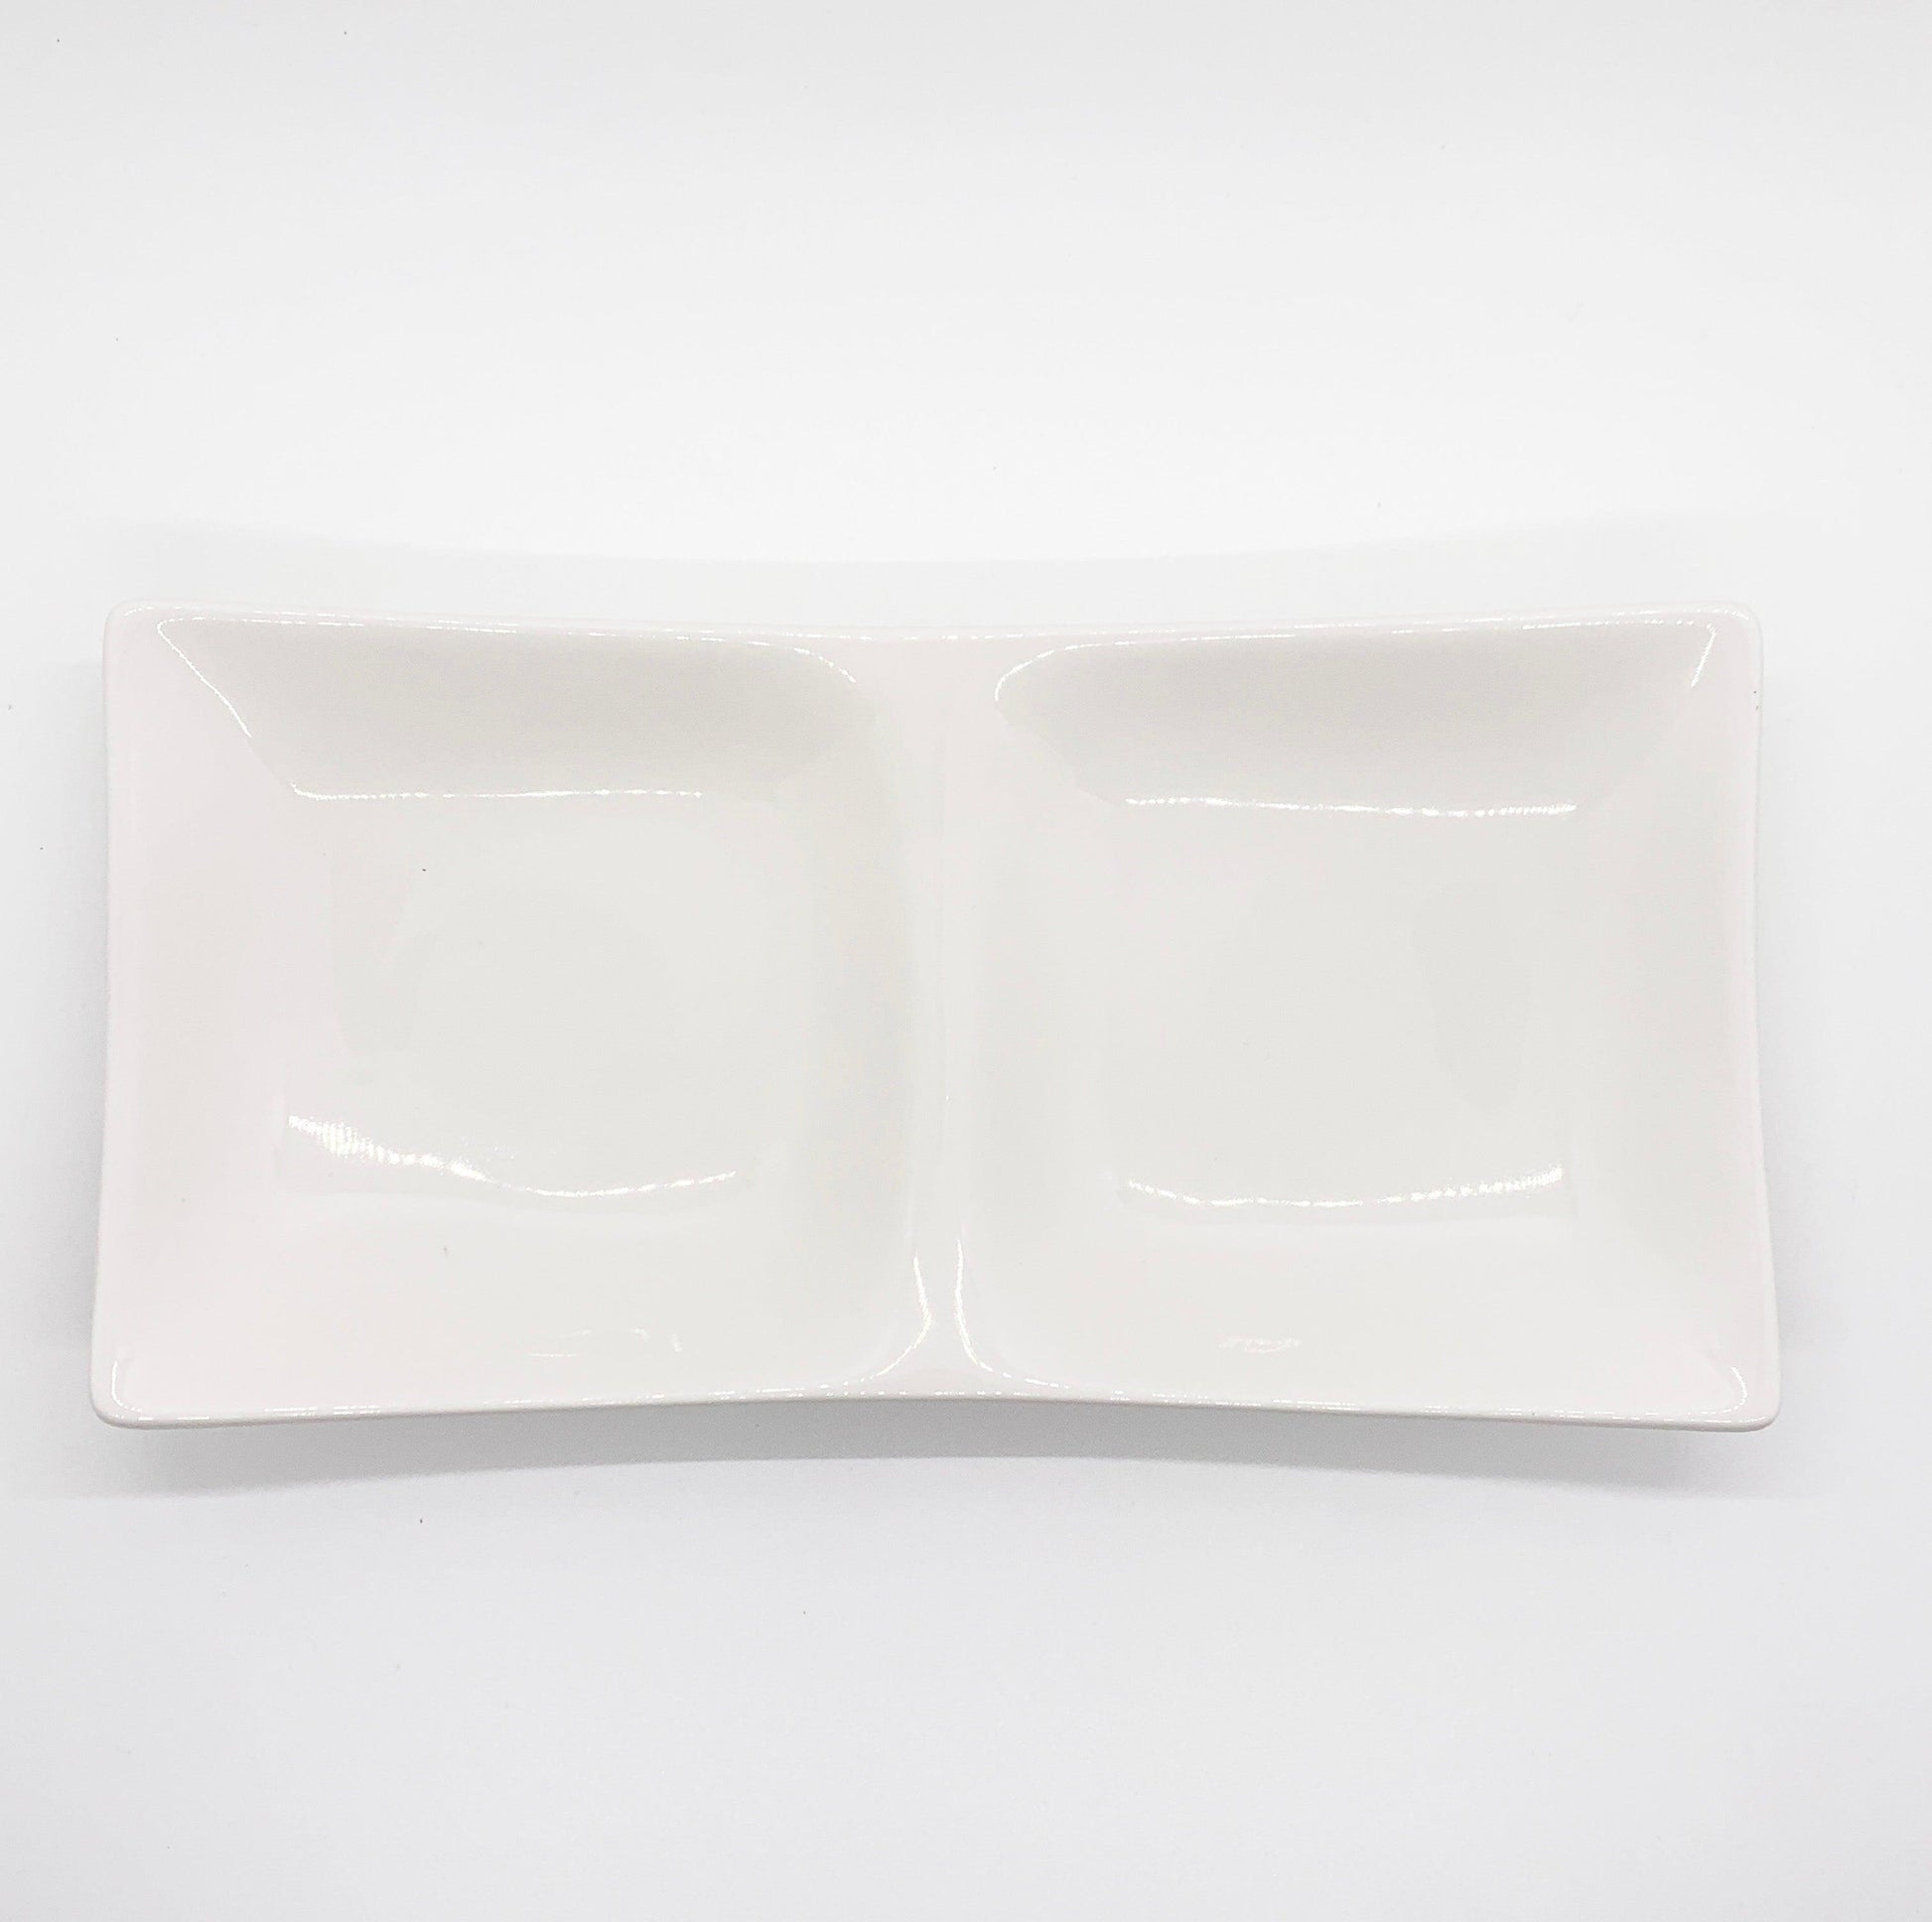 Simple Design] 2 Divided Plate for side dishes